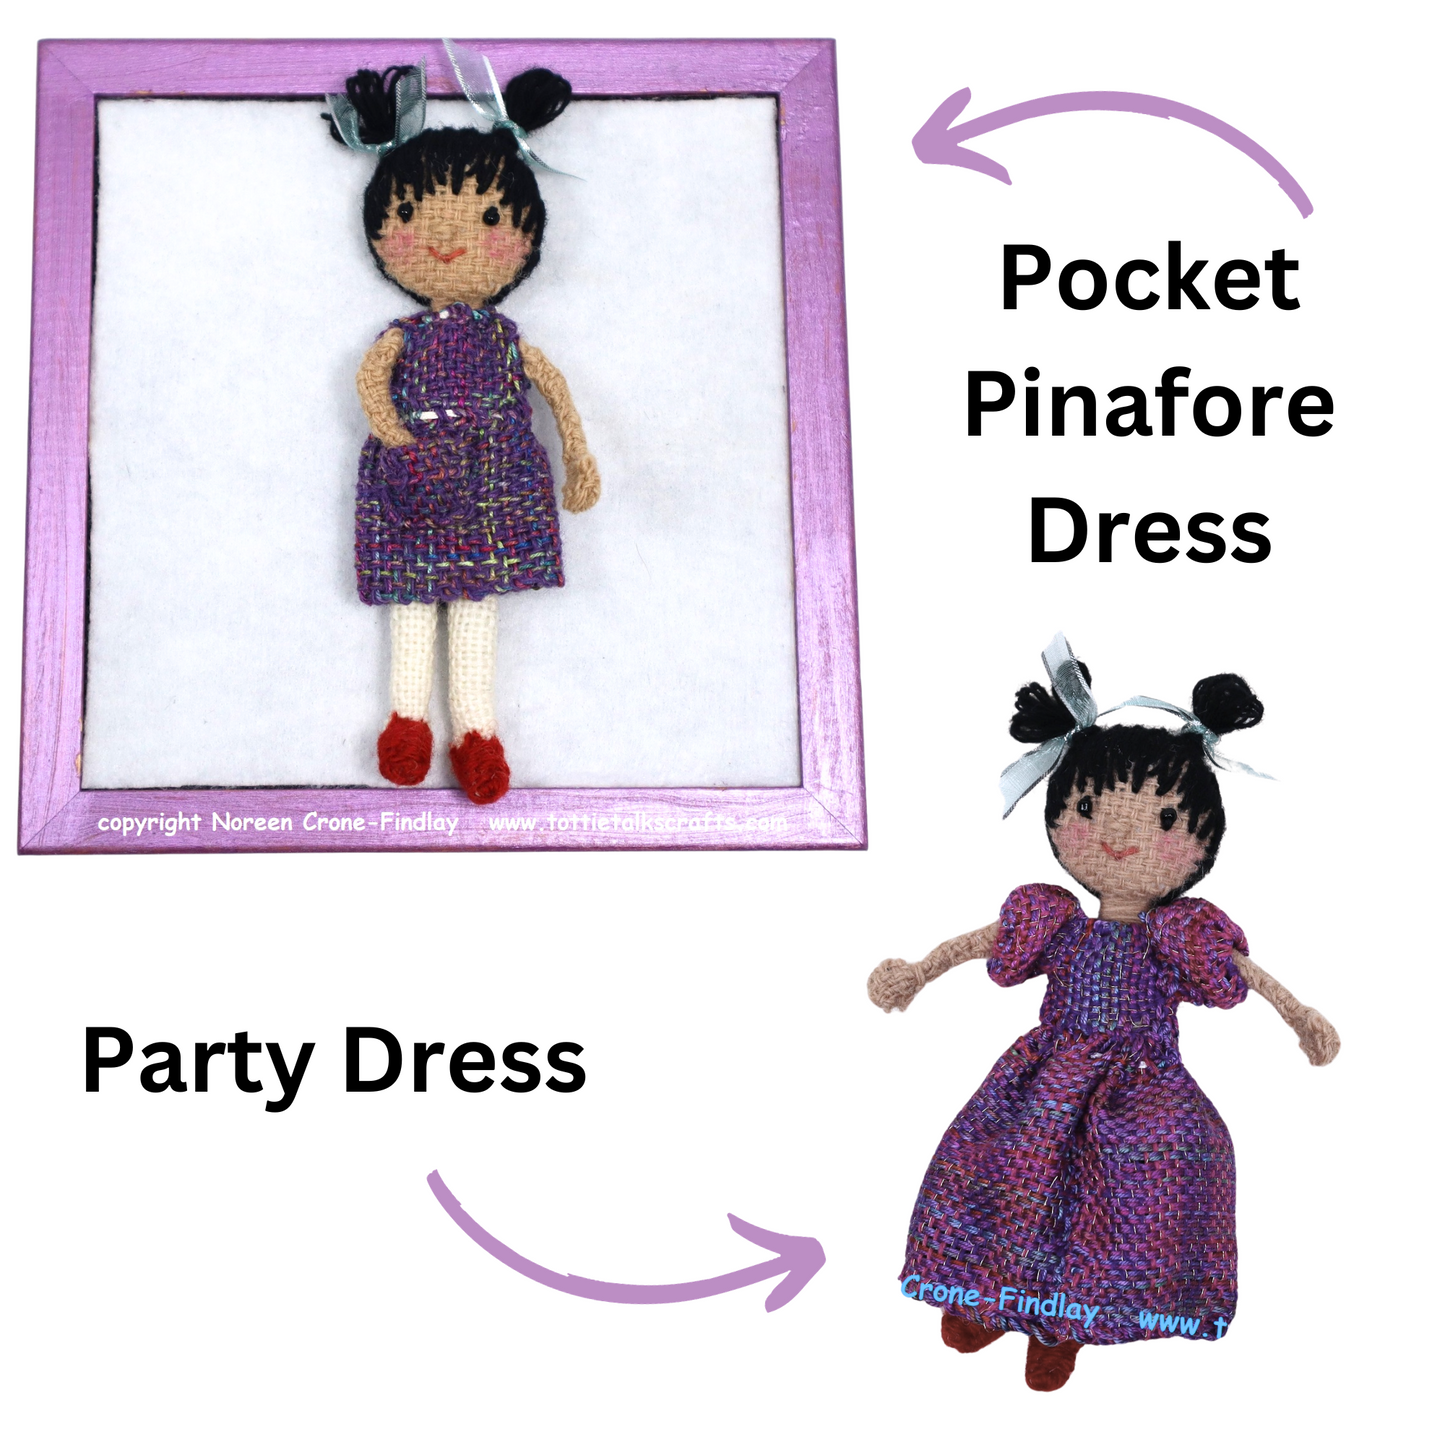 The Lily Doll Party and Pocket Pinafore Dress Kit